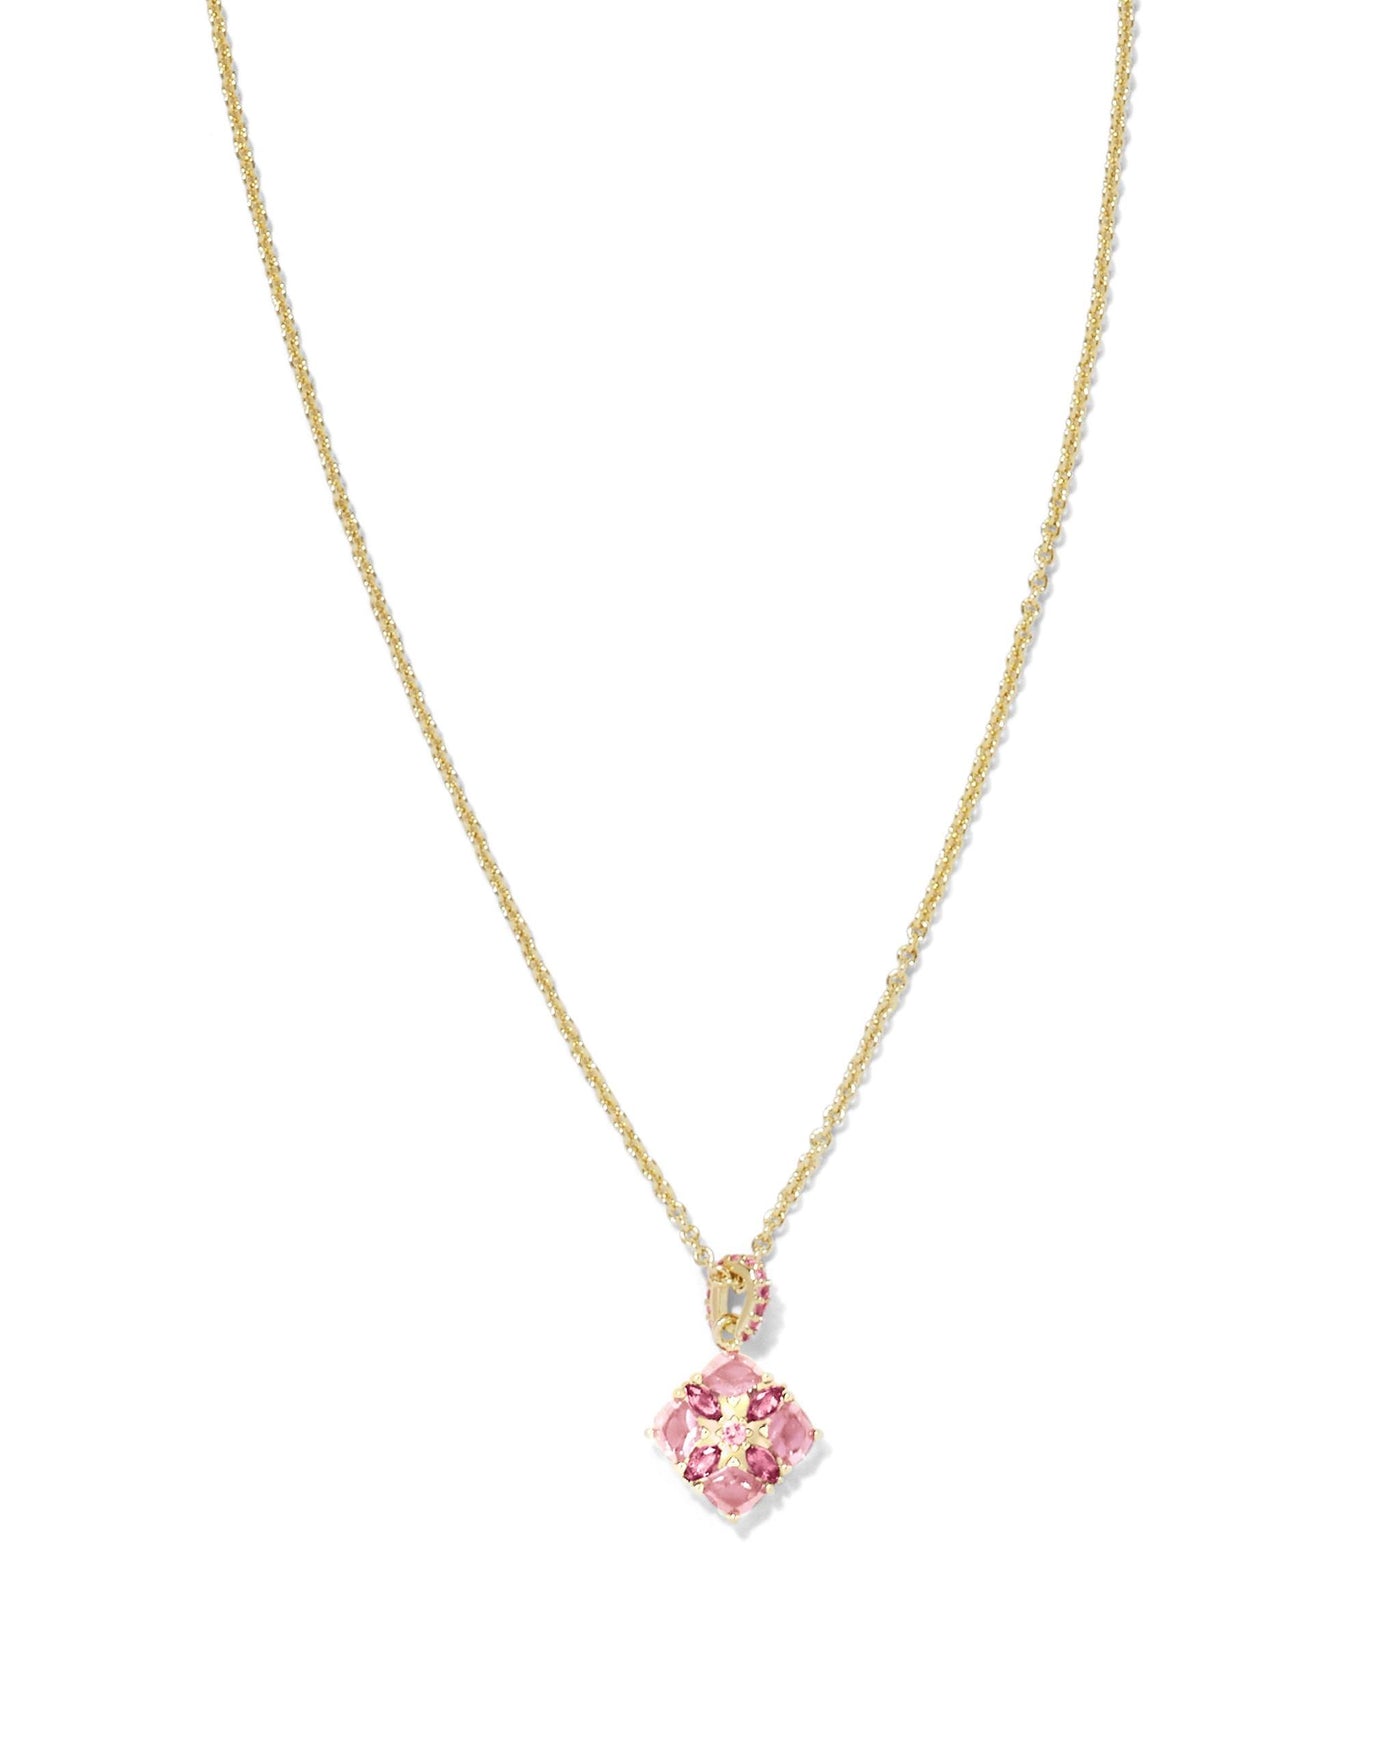 Gold Tone Necklace Featuring Pink Crystal by Kendra Scott